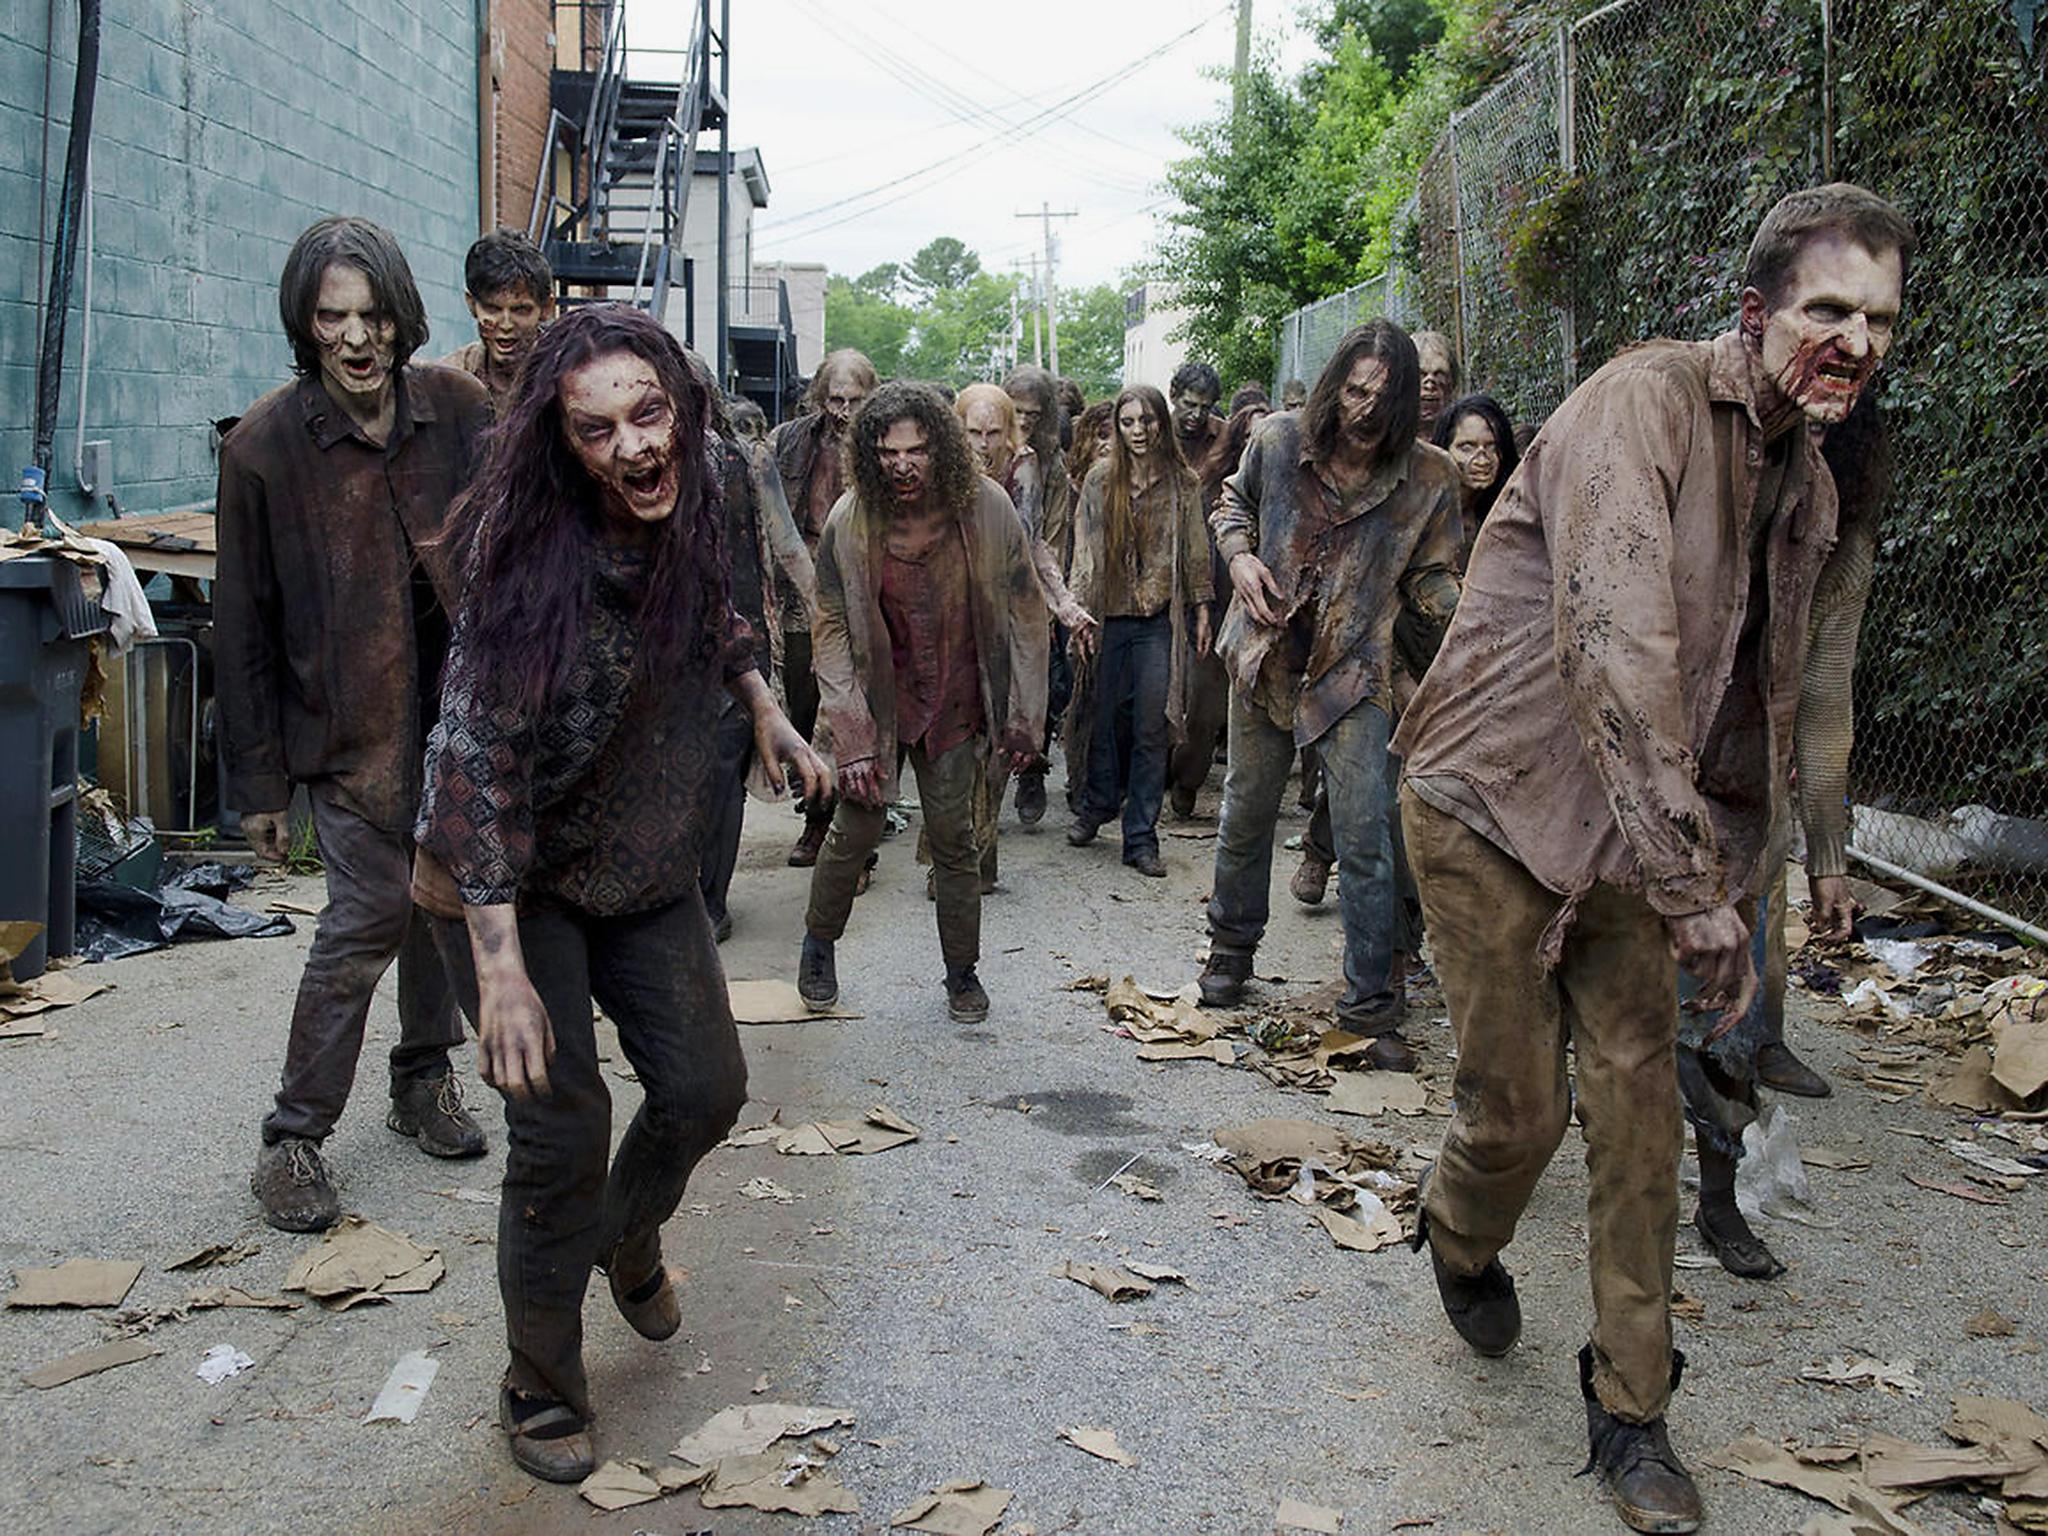 Thorpe Park to open terrifying Walking Dead-themed roller coaster ride